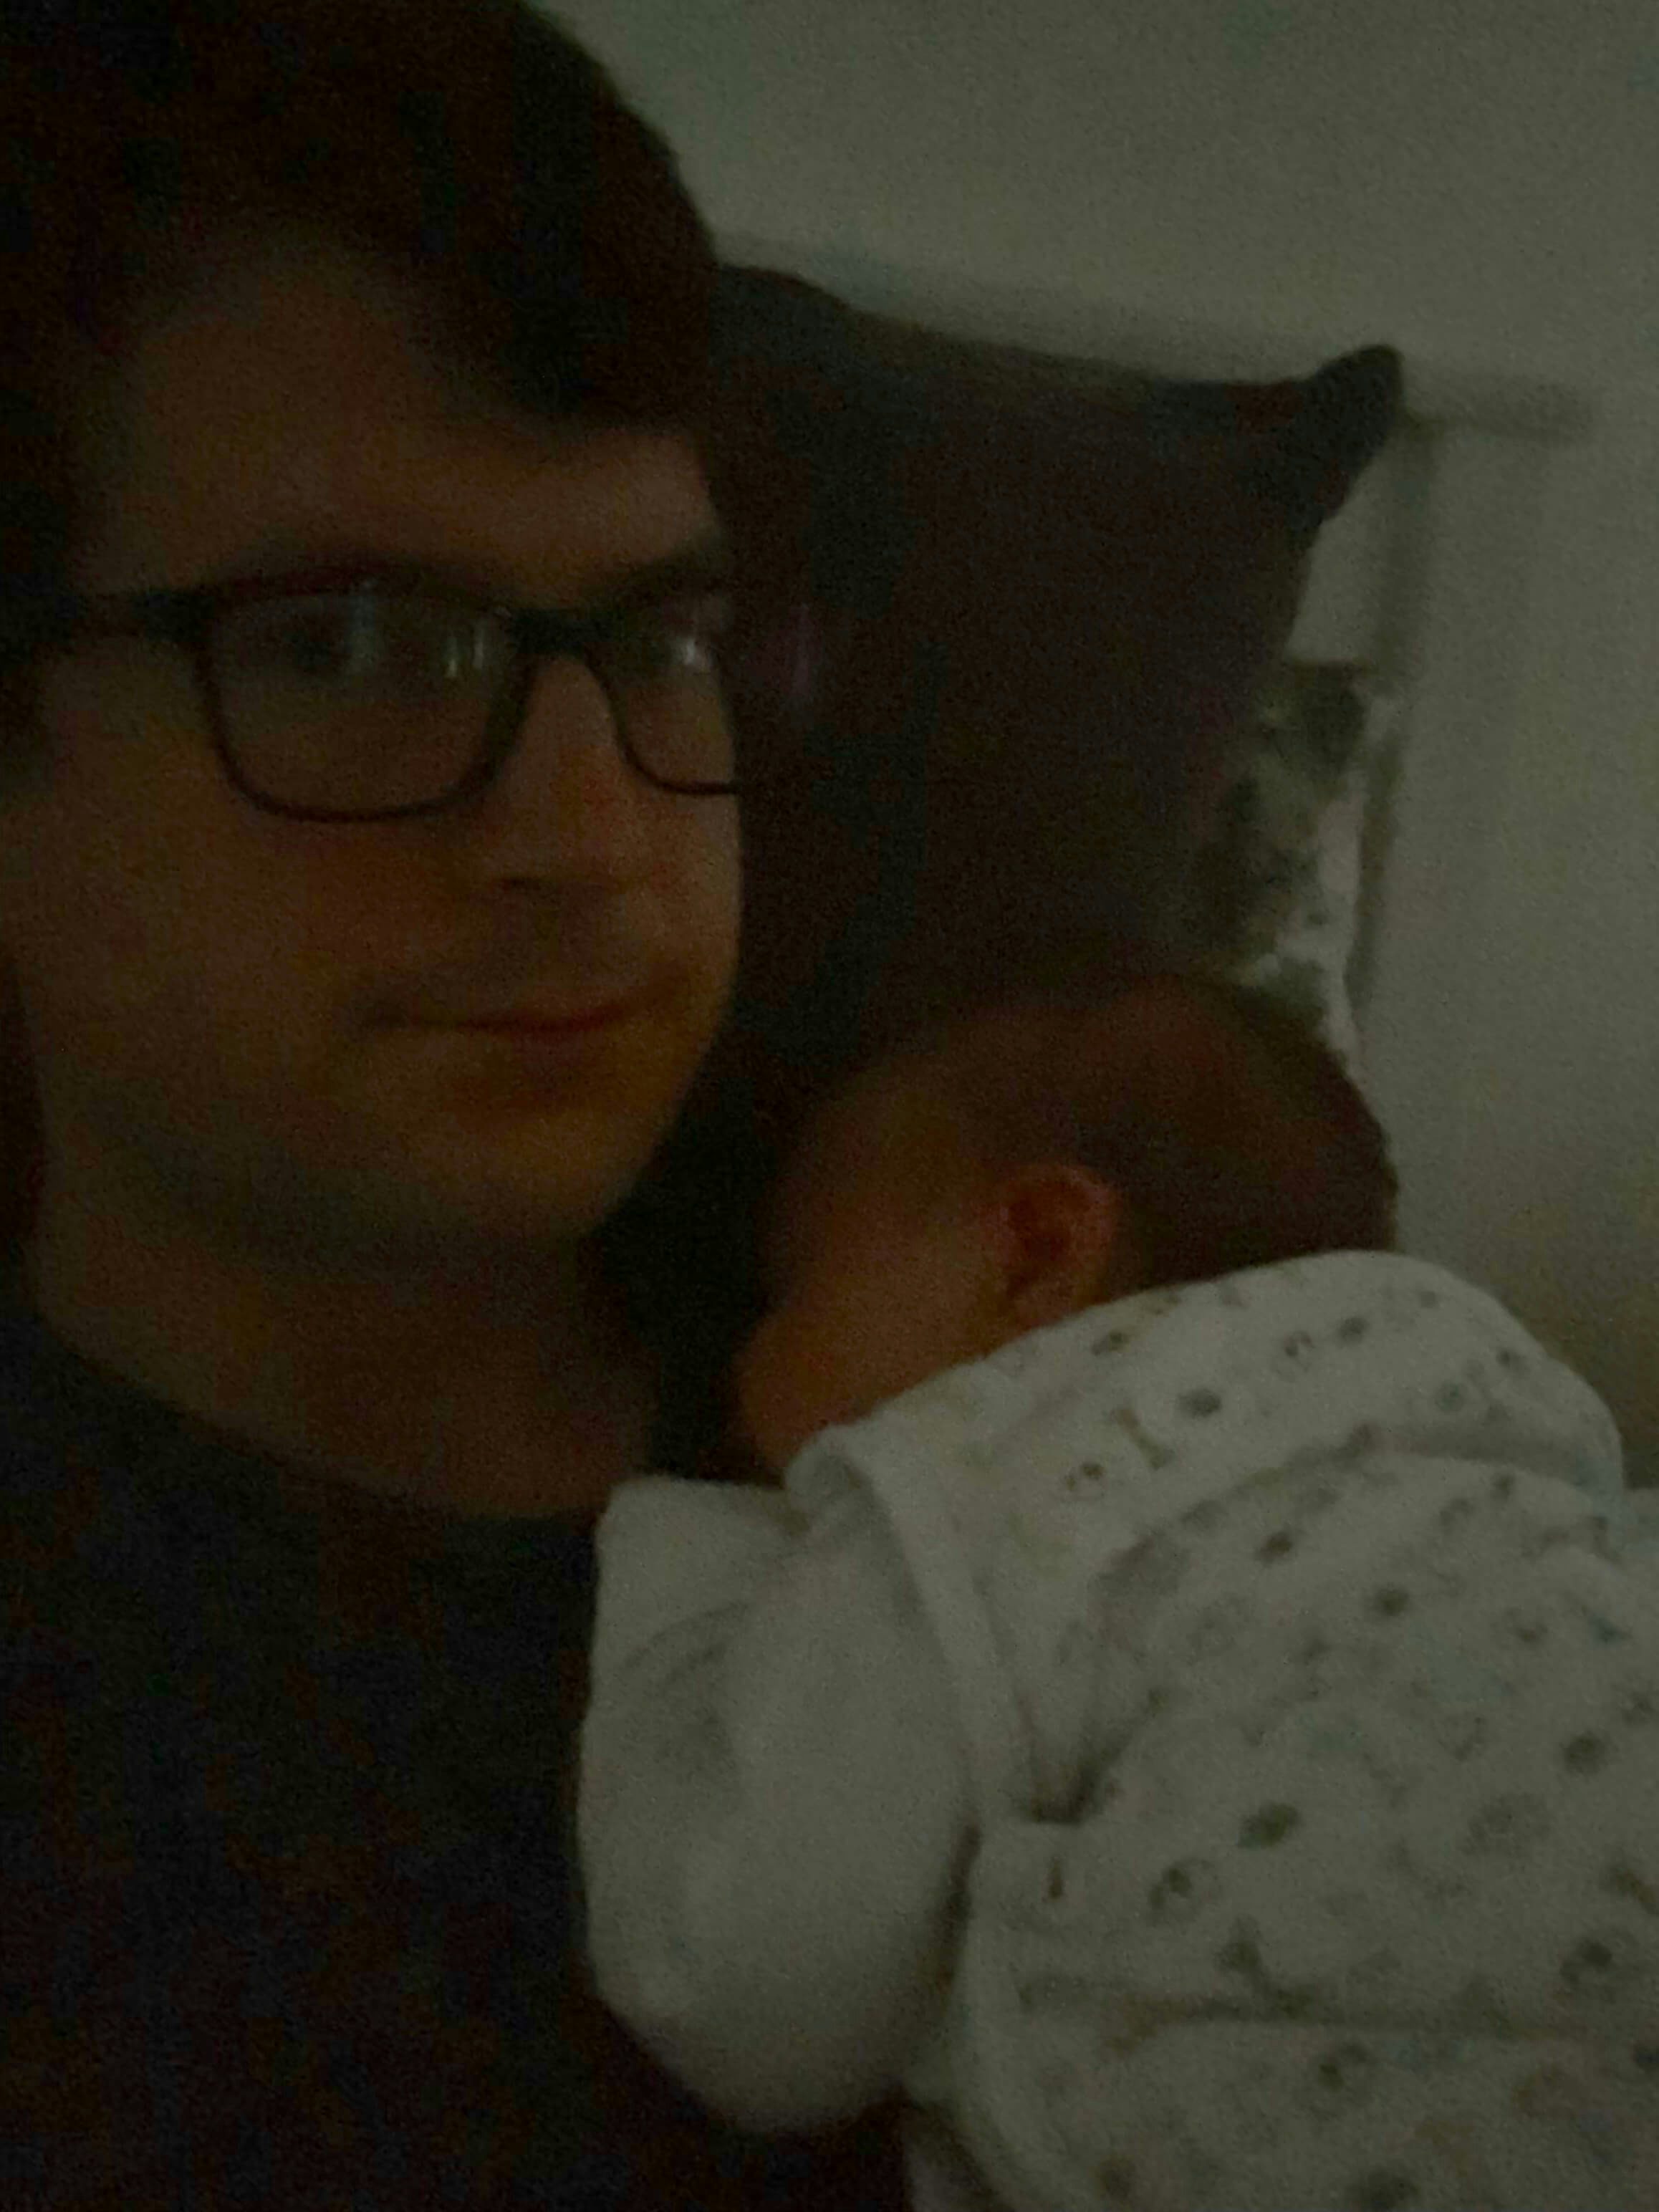 A baby asleep on her dad’s chest